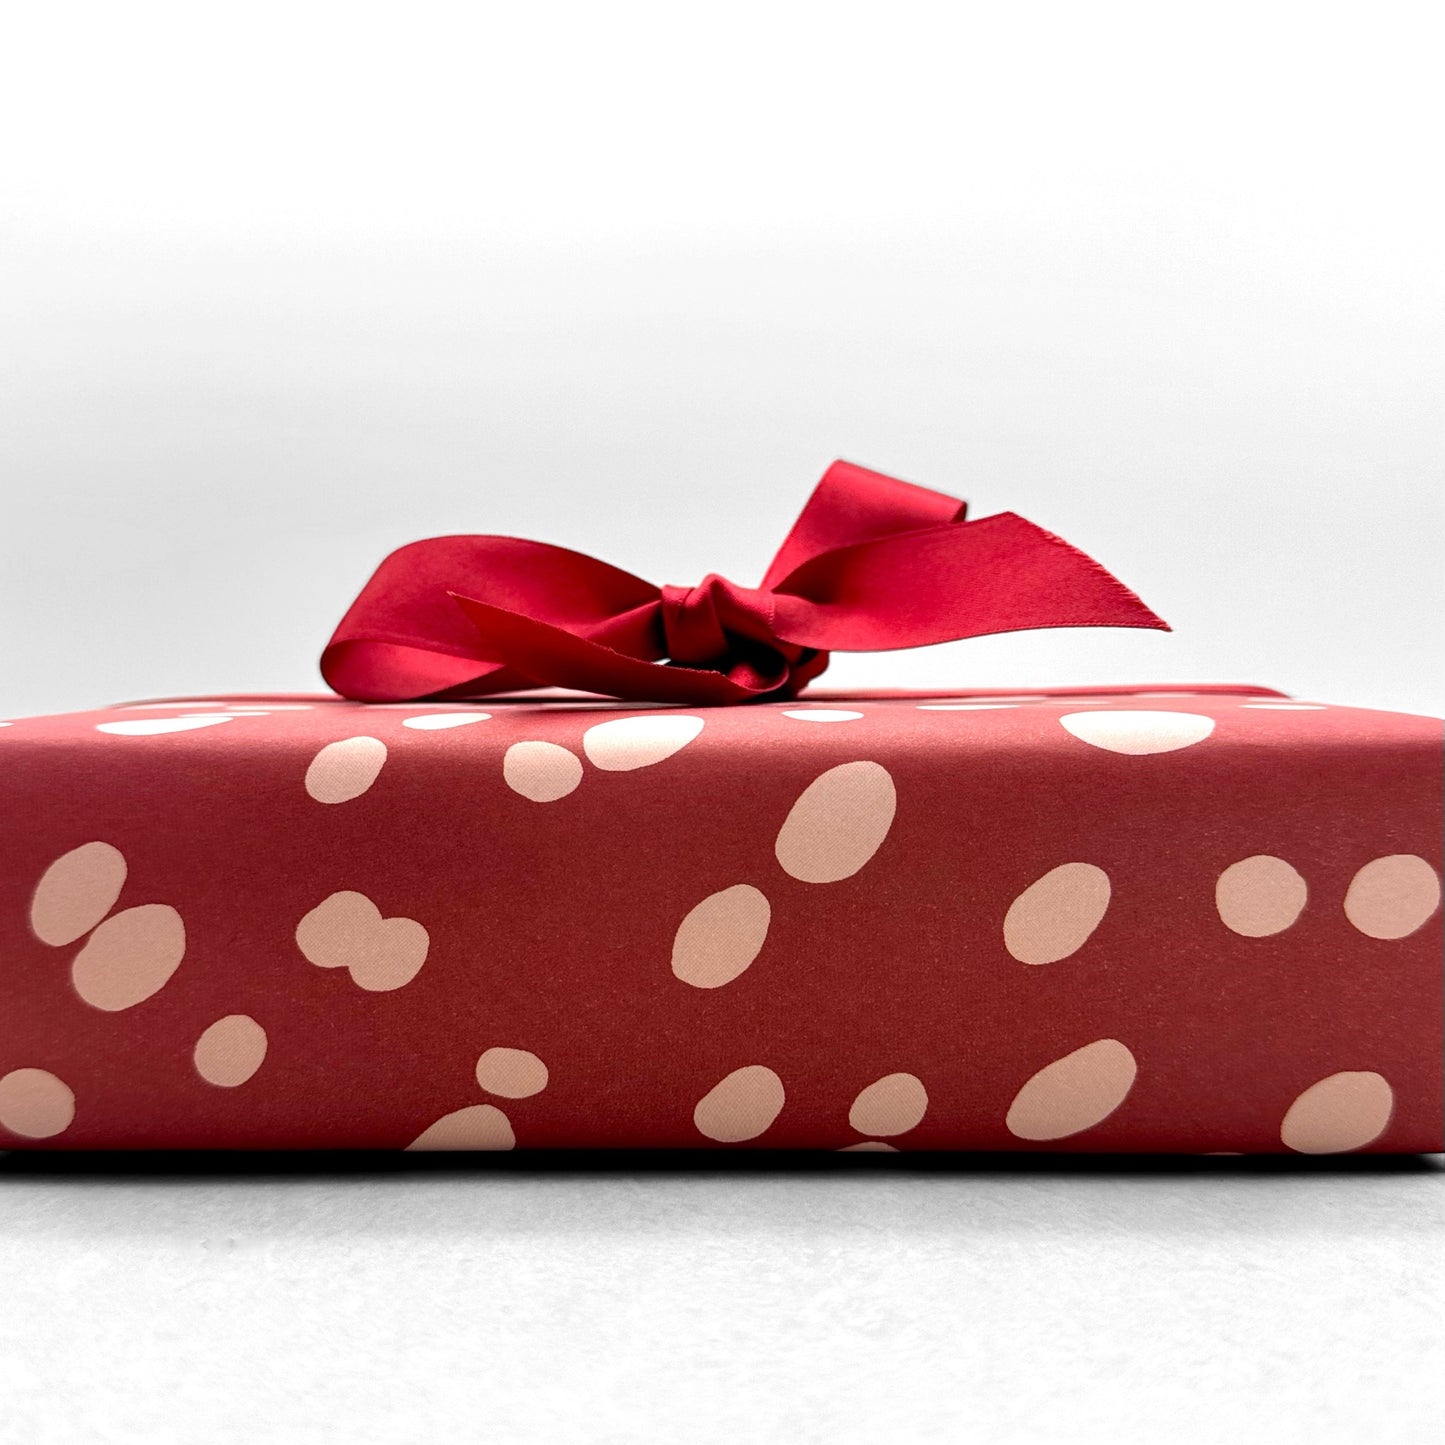 burgundy rouge wrapping paper with random blush pink spots, by Heather Evelyn. Pictured wrapped with a red satin ribbon bow